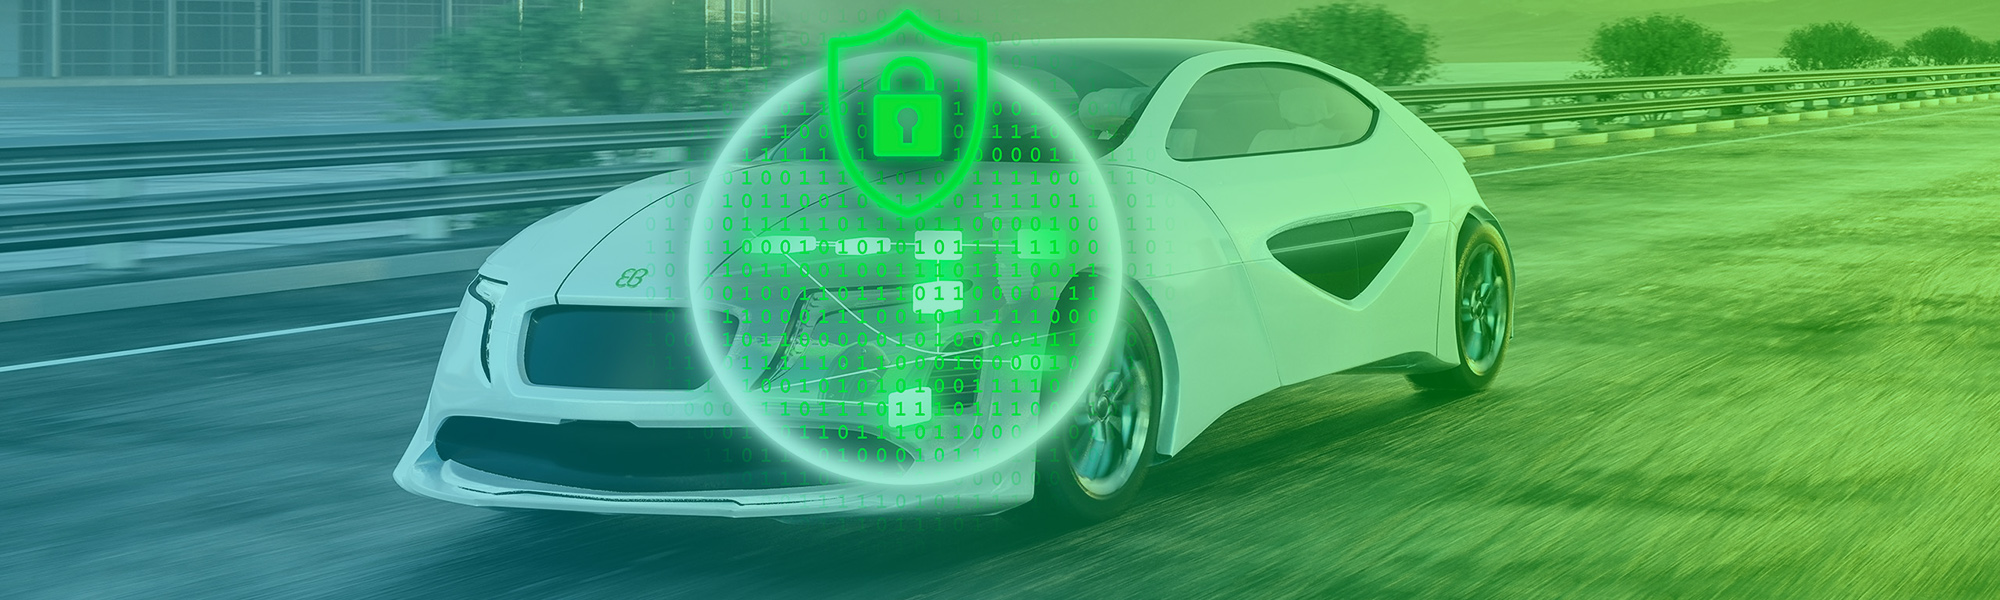 Automotive Embedded Security